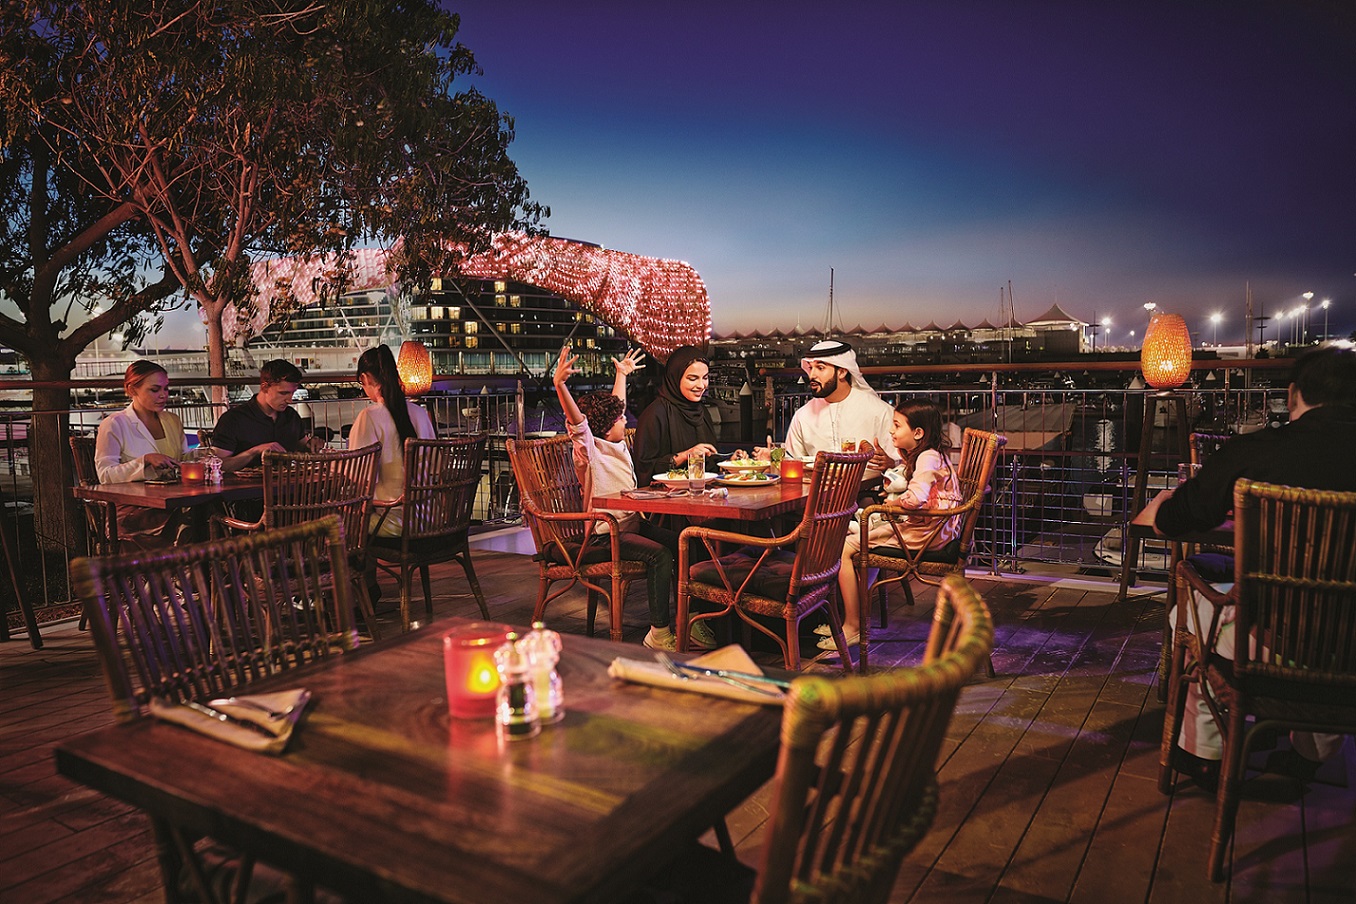 Families are more than welcome for dining across Yas Island, including at Yas Marina